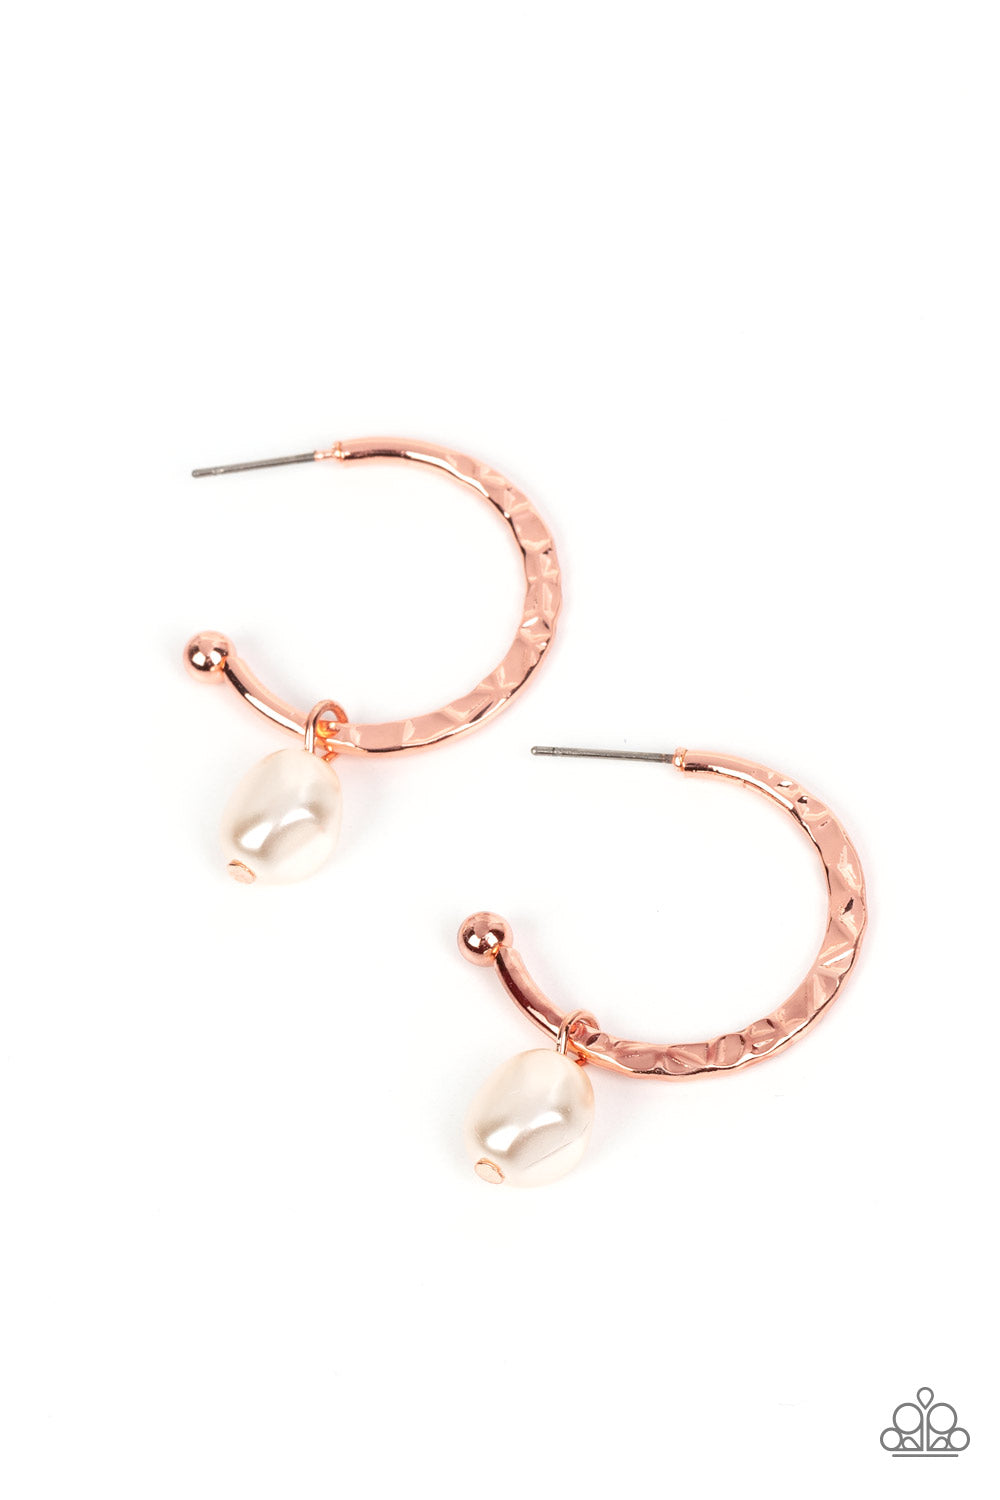 GLAM Overboard Paparazzi Accessories Earrings - Copper